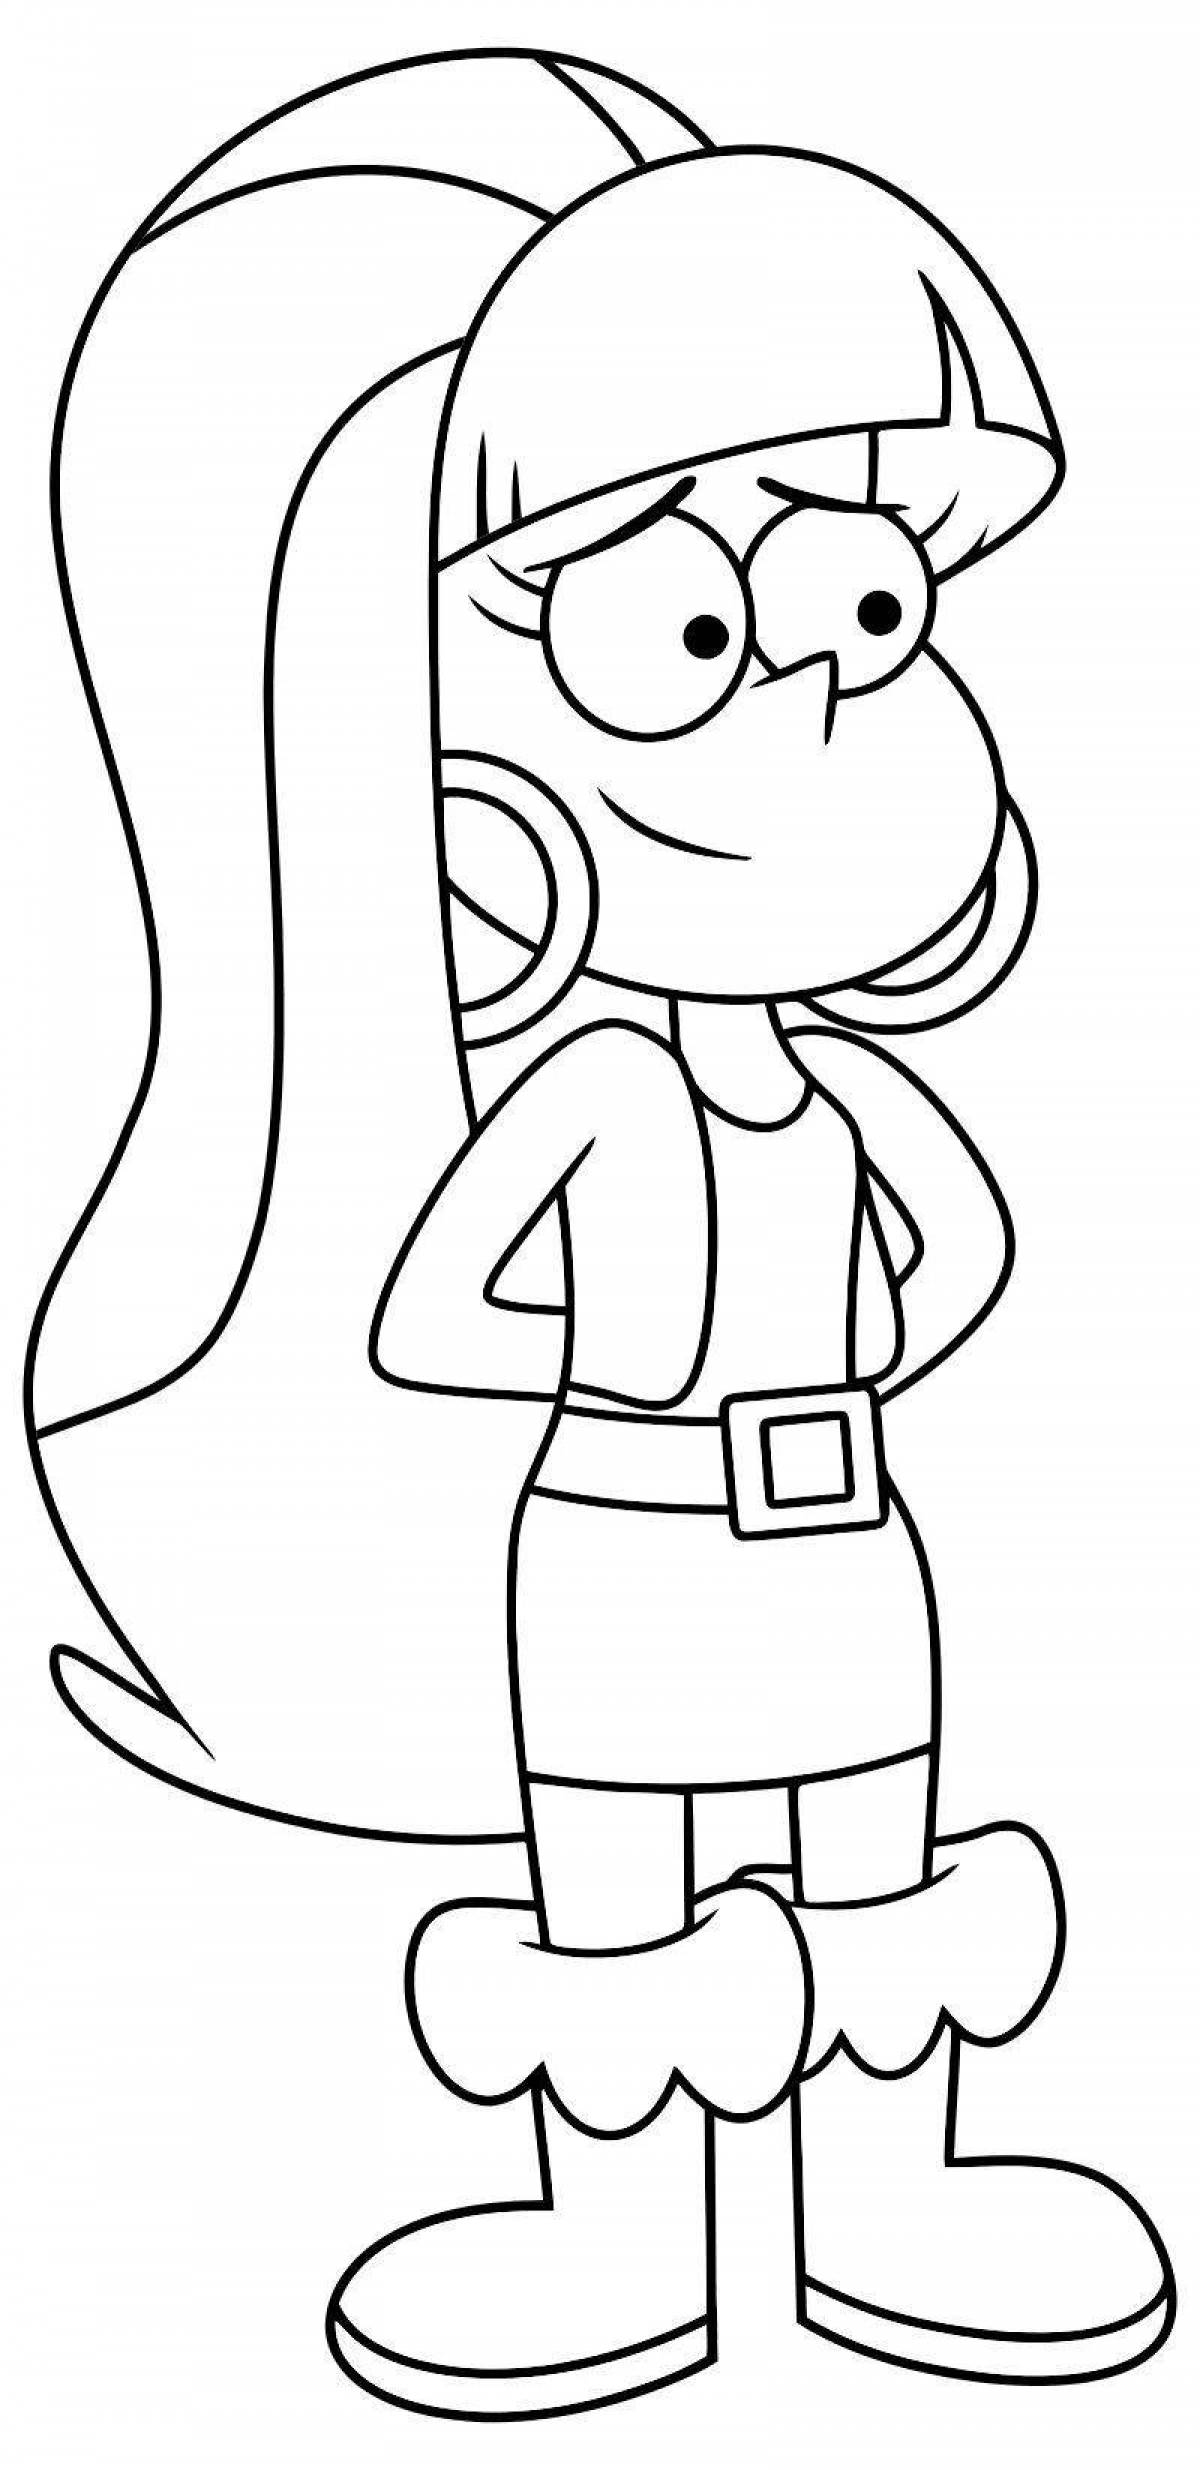 Dipper Pines Animated Coloring Page